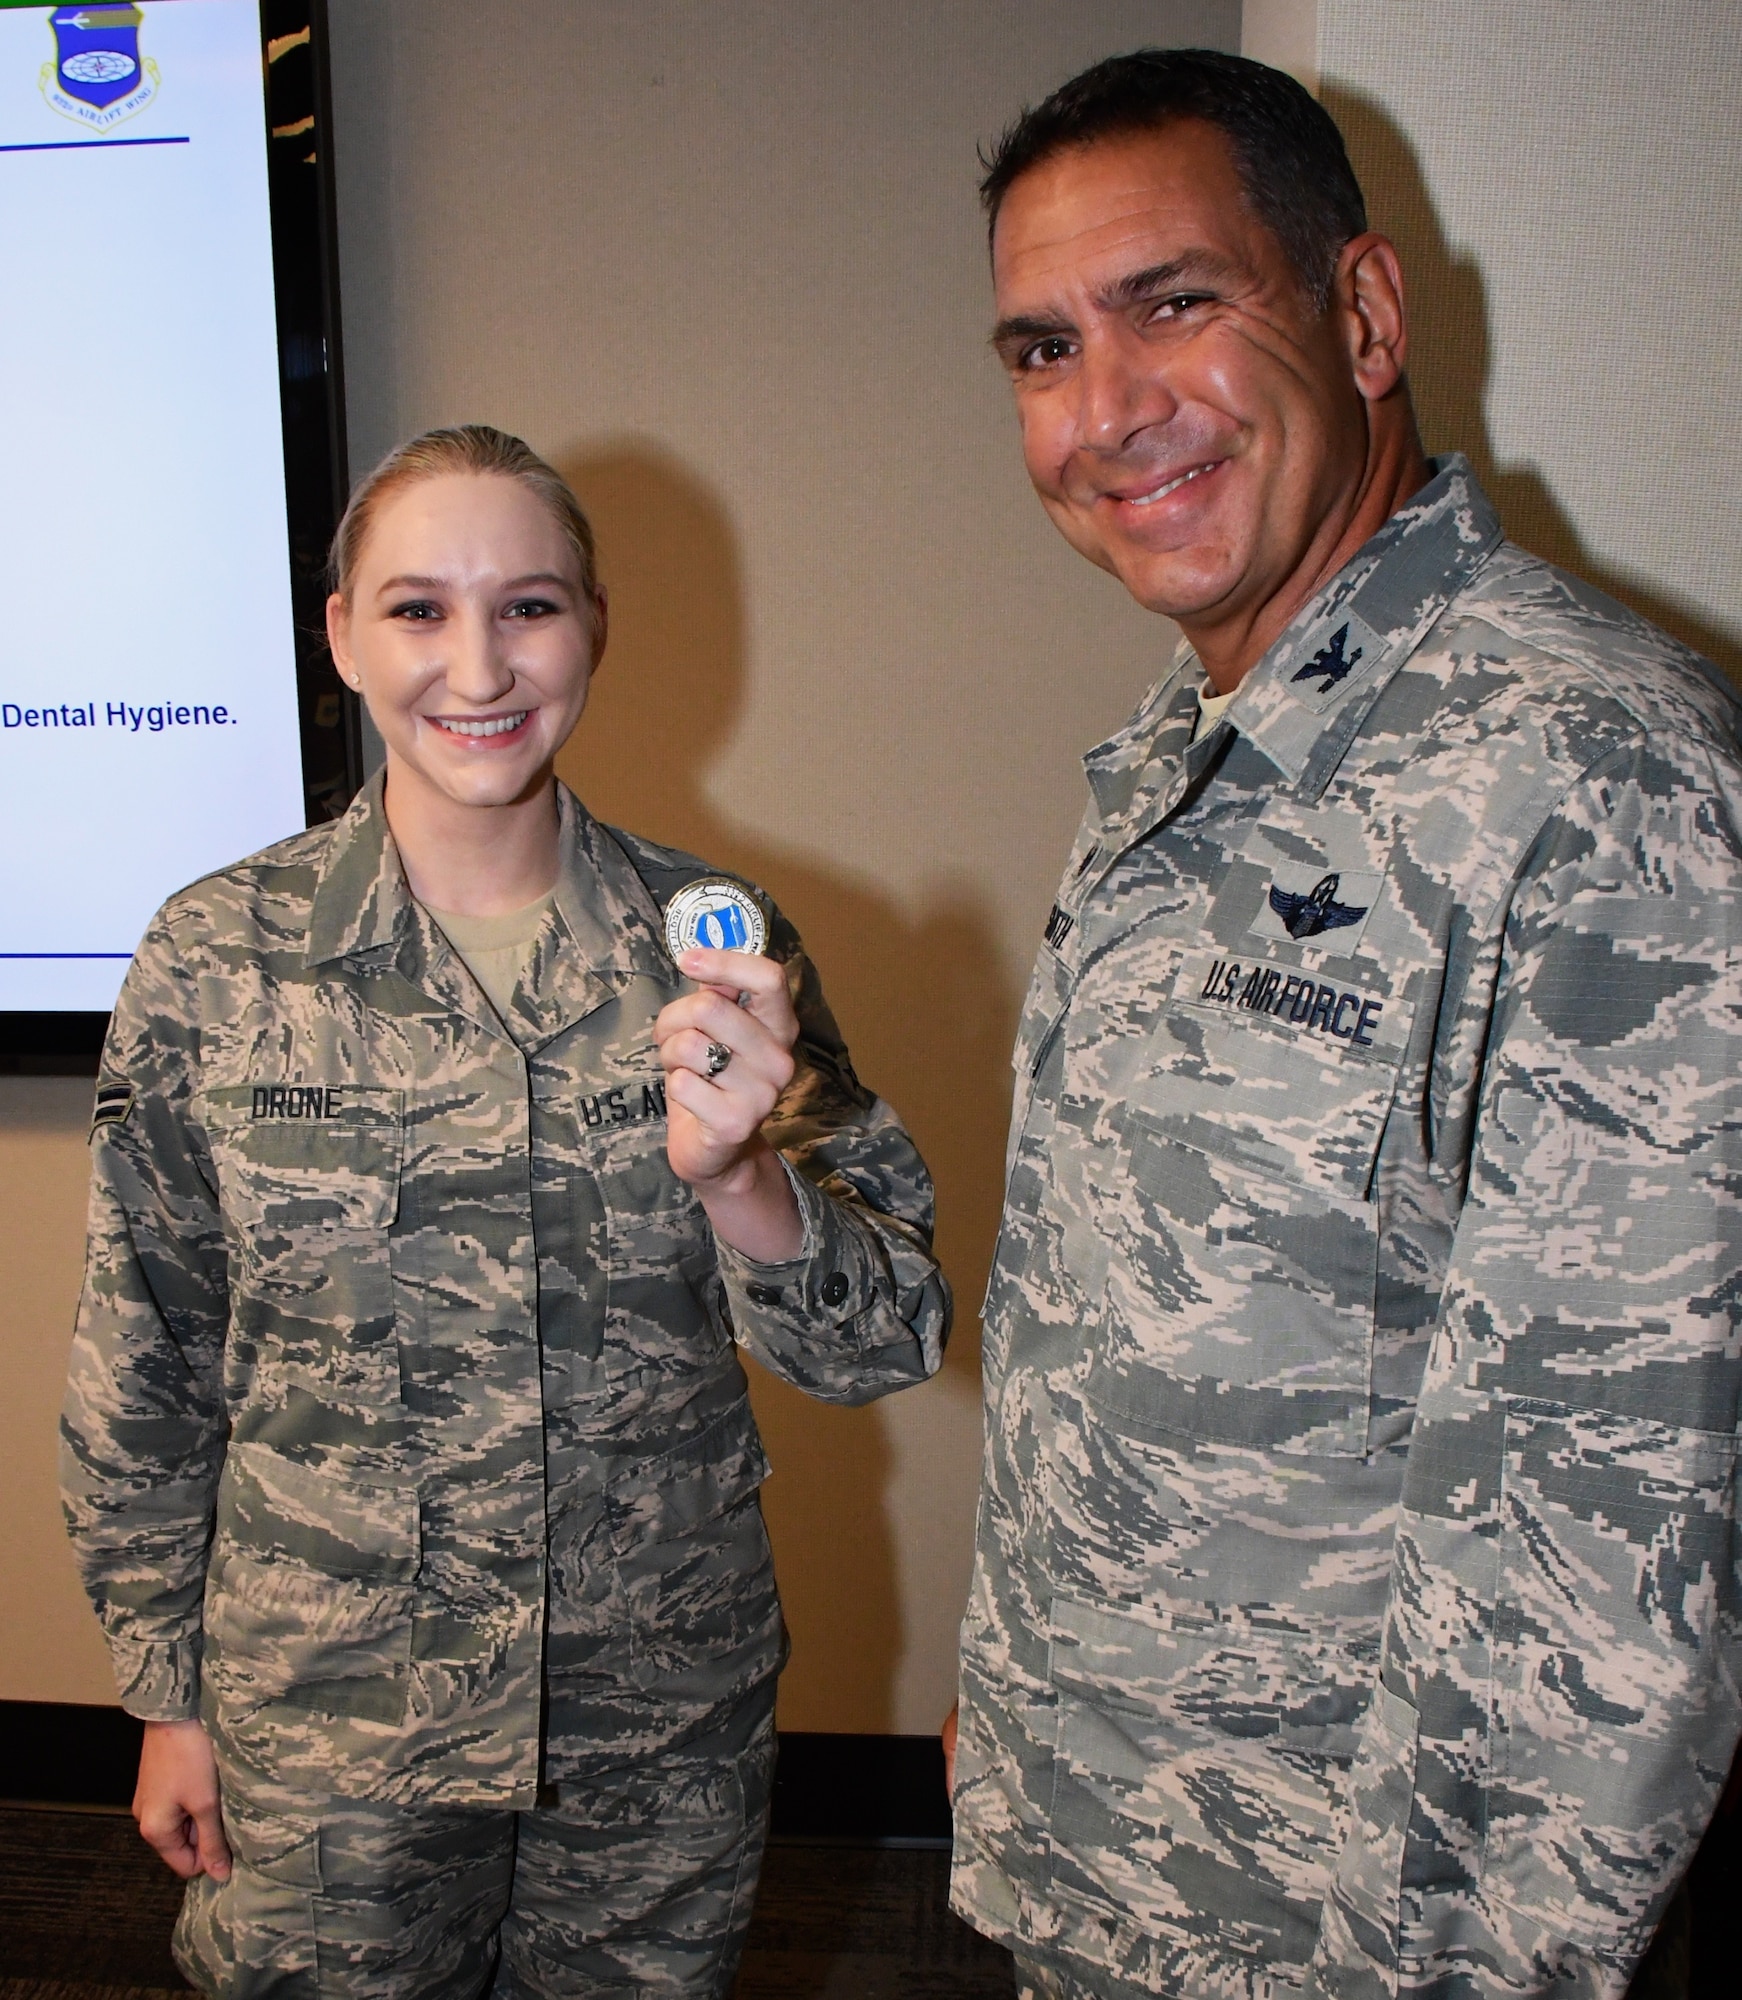 At right, the commander of the 932nd Airlift Wing, Col. Raymond Smith, presented a special wing coin to Airman First Class Megan Drone, who was spotlighted during the pre-Unit Training Assembly meeting on August 3, 2018, at Scott Air Force Base.   Airman Drone is a health service management specialist in the 932d Medical Group's 932nd Medical Squadron.  She said, "I enjoy experiencing being in the military part time, while continuing my civilian career and family life, and having control of that balance while meeting so many wonderful people."  (U.S. Air Force photo by Lt. Col. Stan Paregien